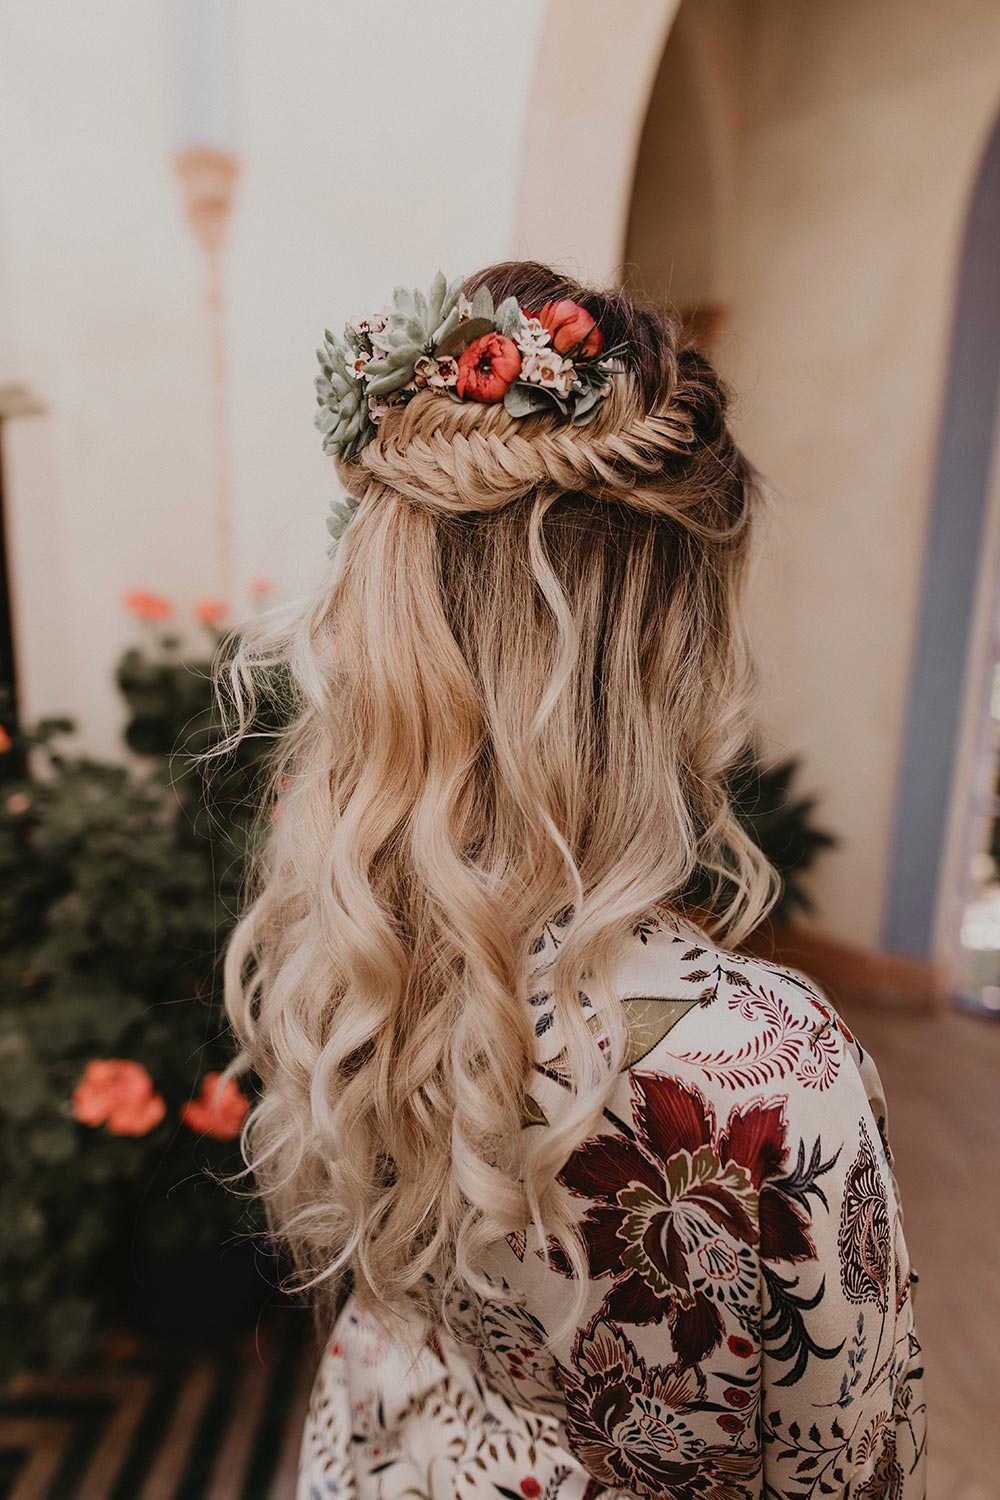 19 ways to wear flowers in your bridal hairstyle ~ KISS THE BRIDE MAGAZINE